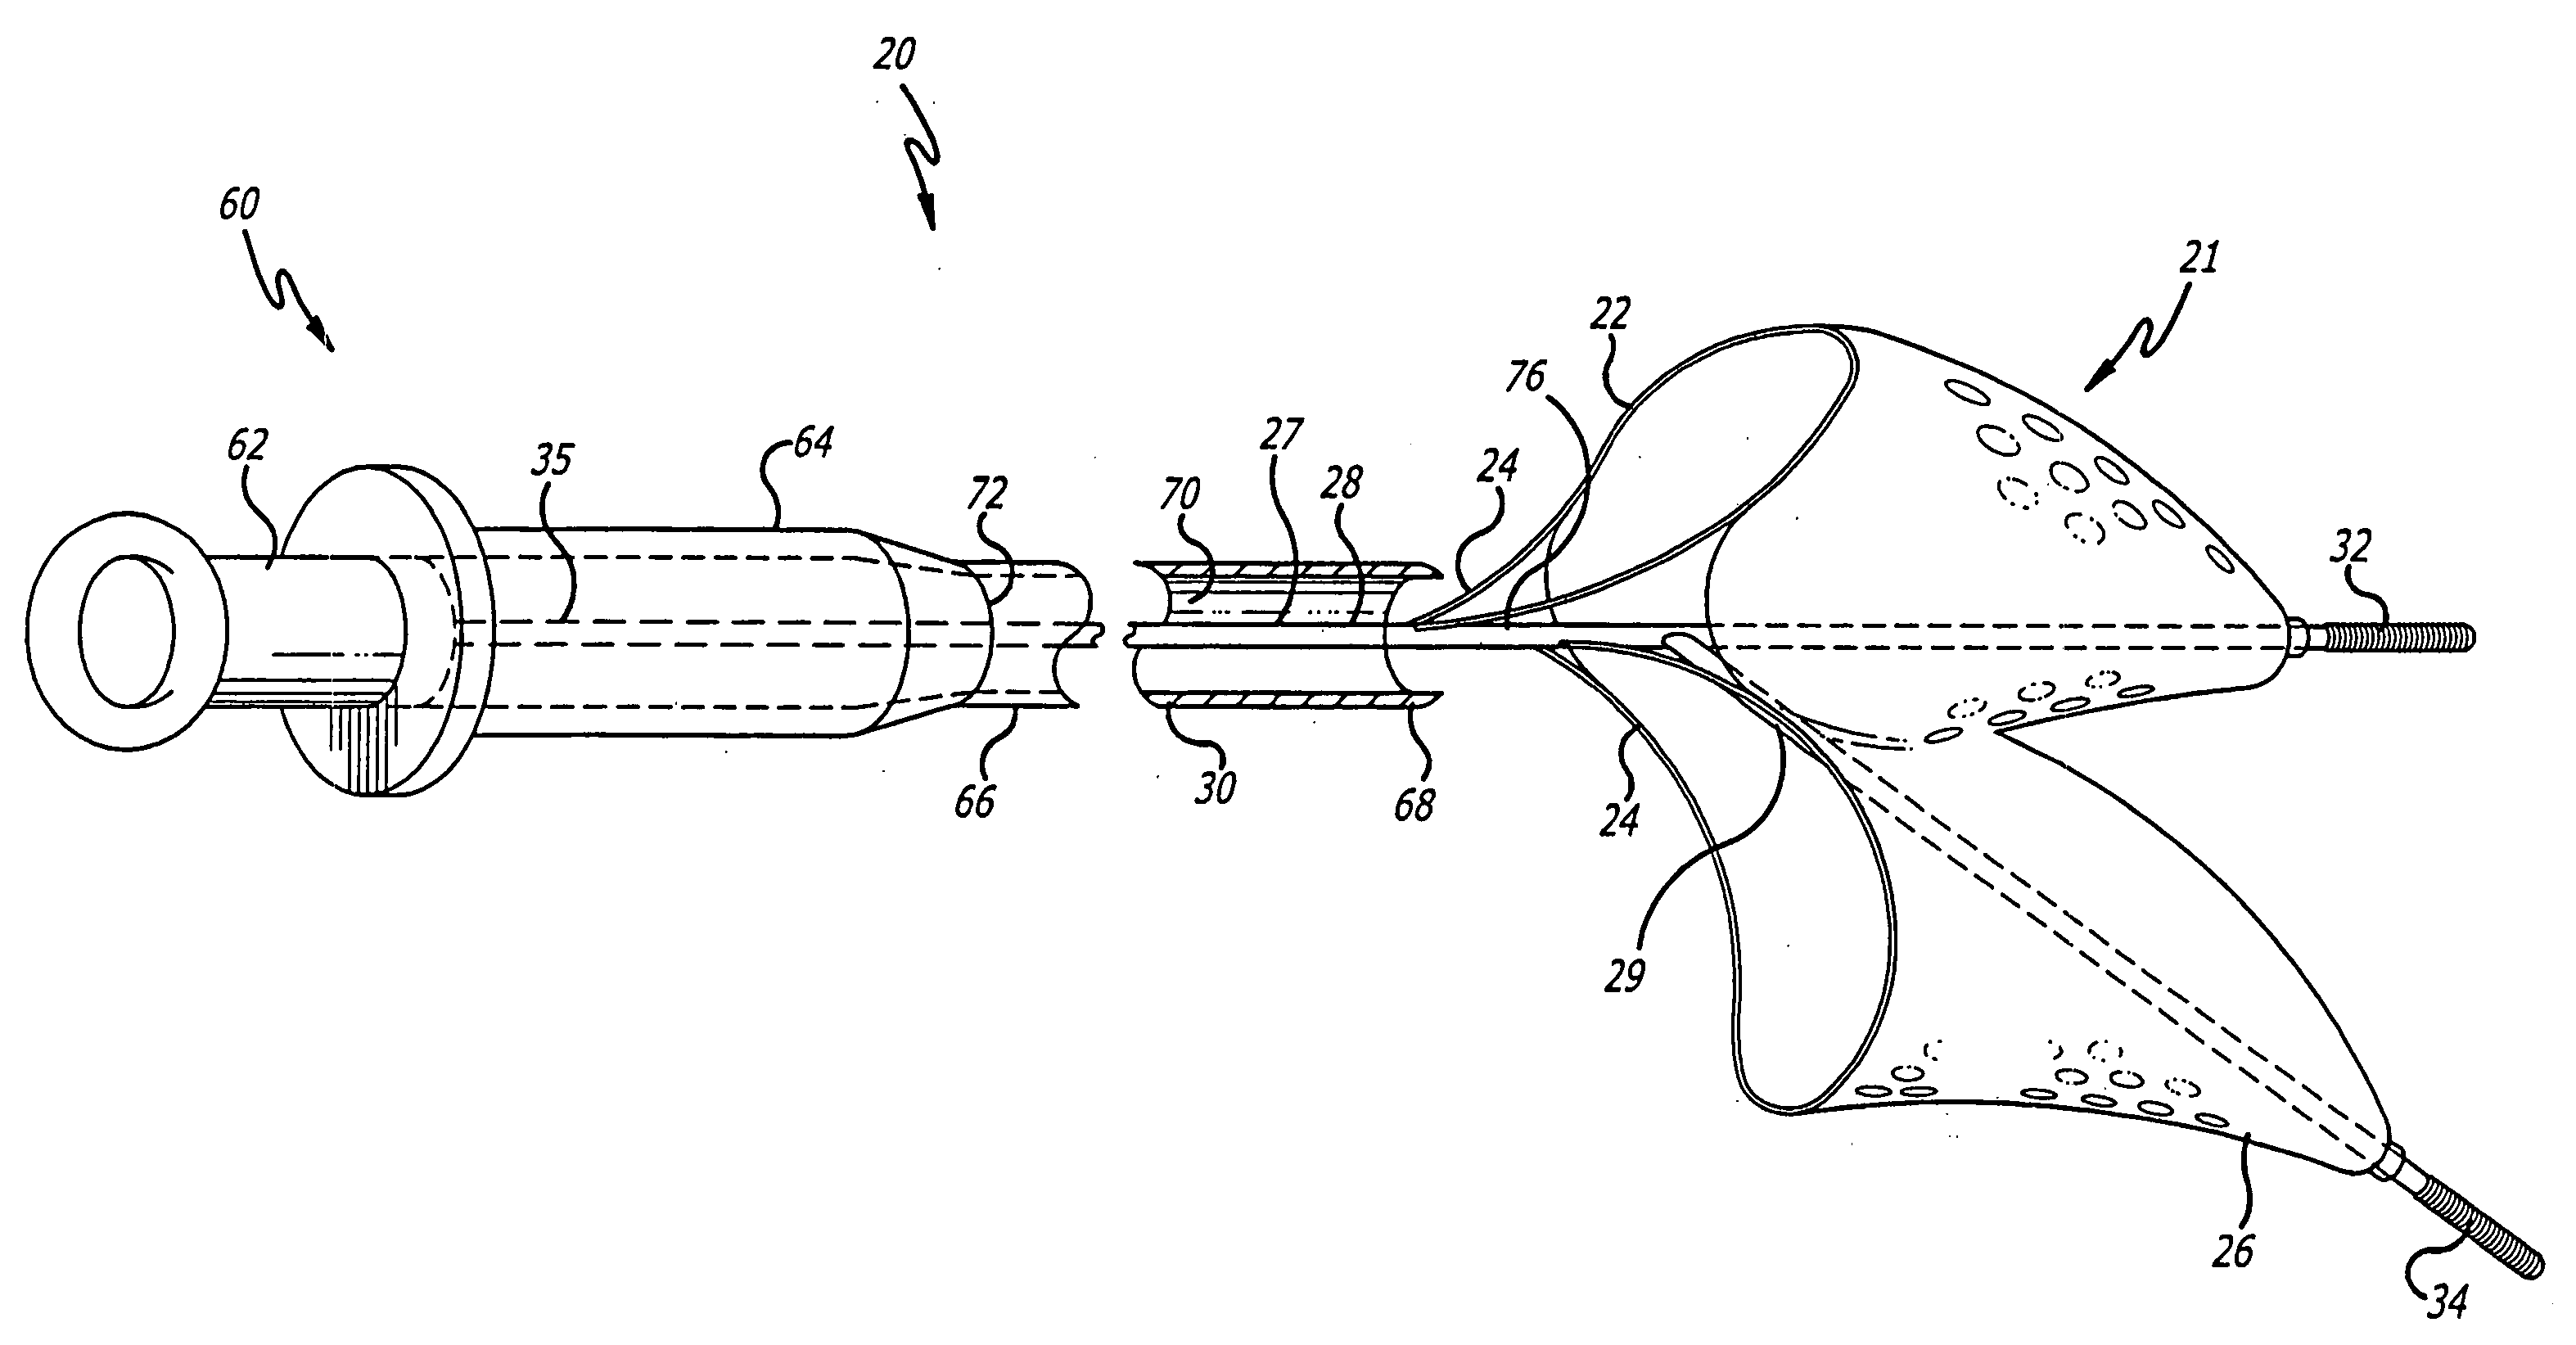 Embolic filtering devices for bifurcated vessels